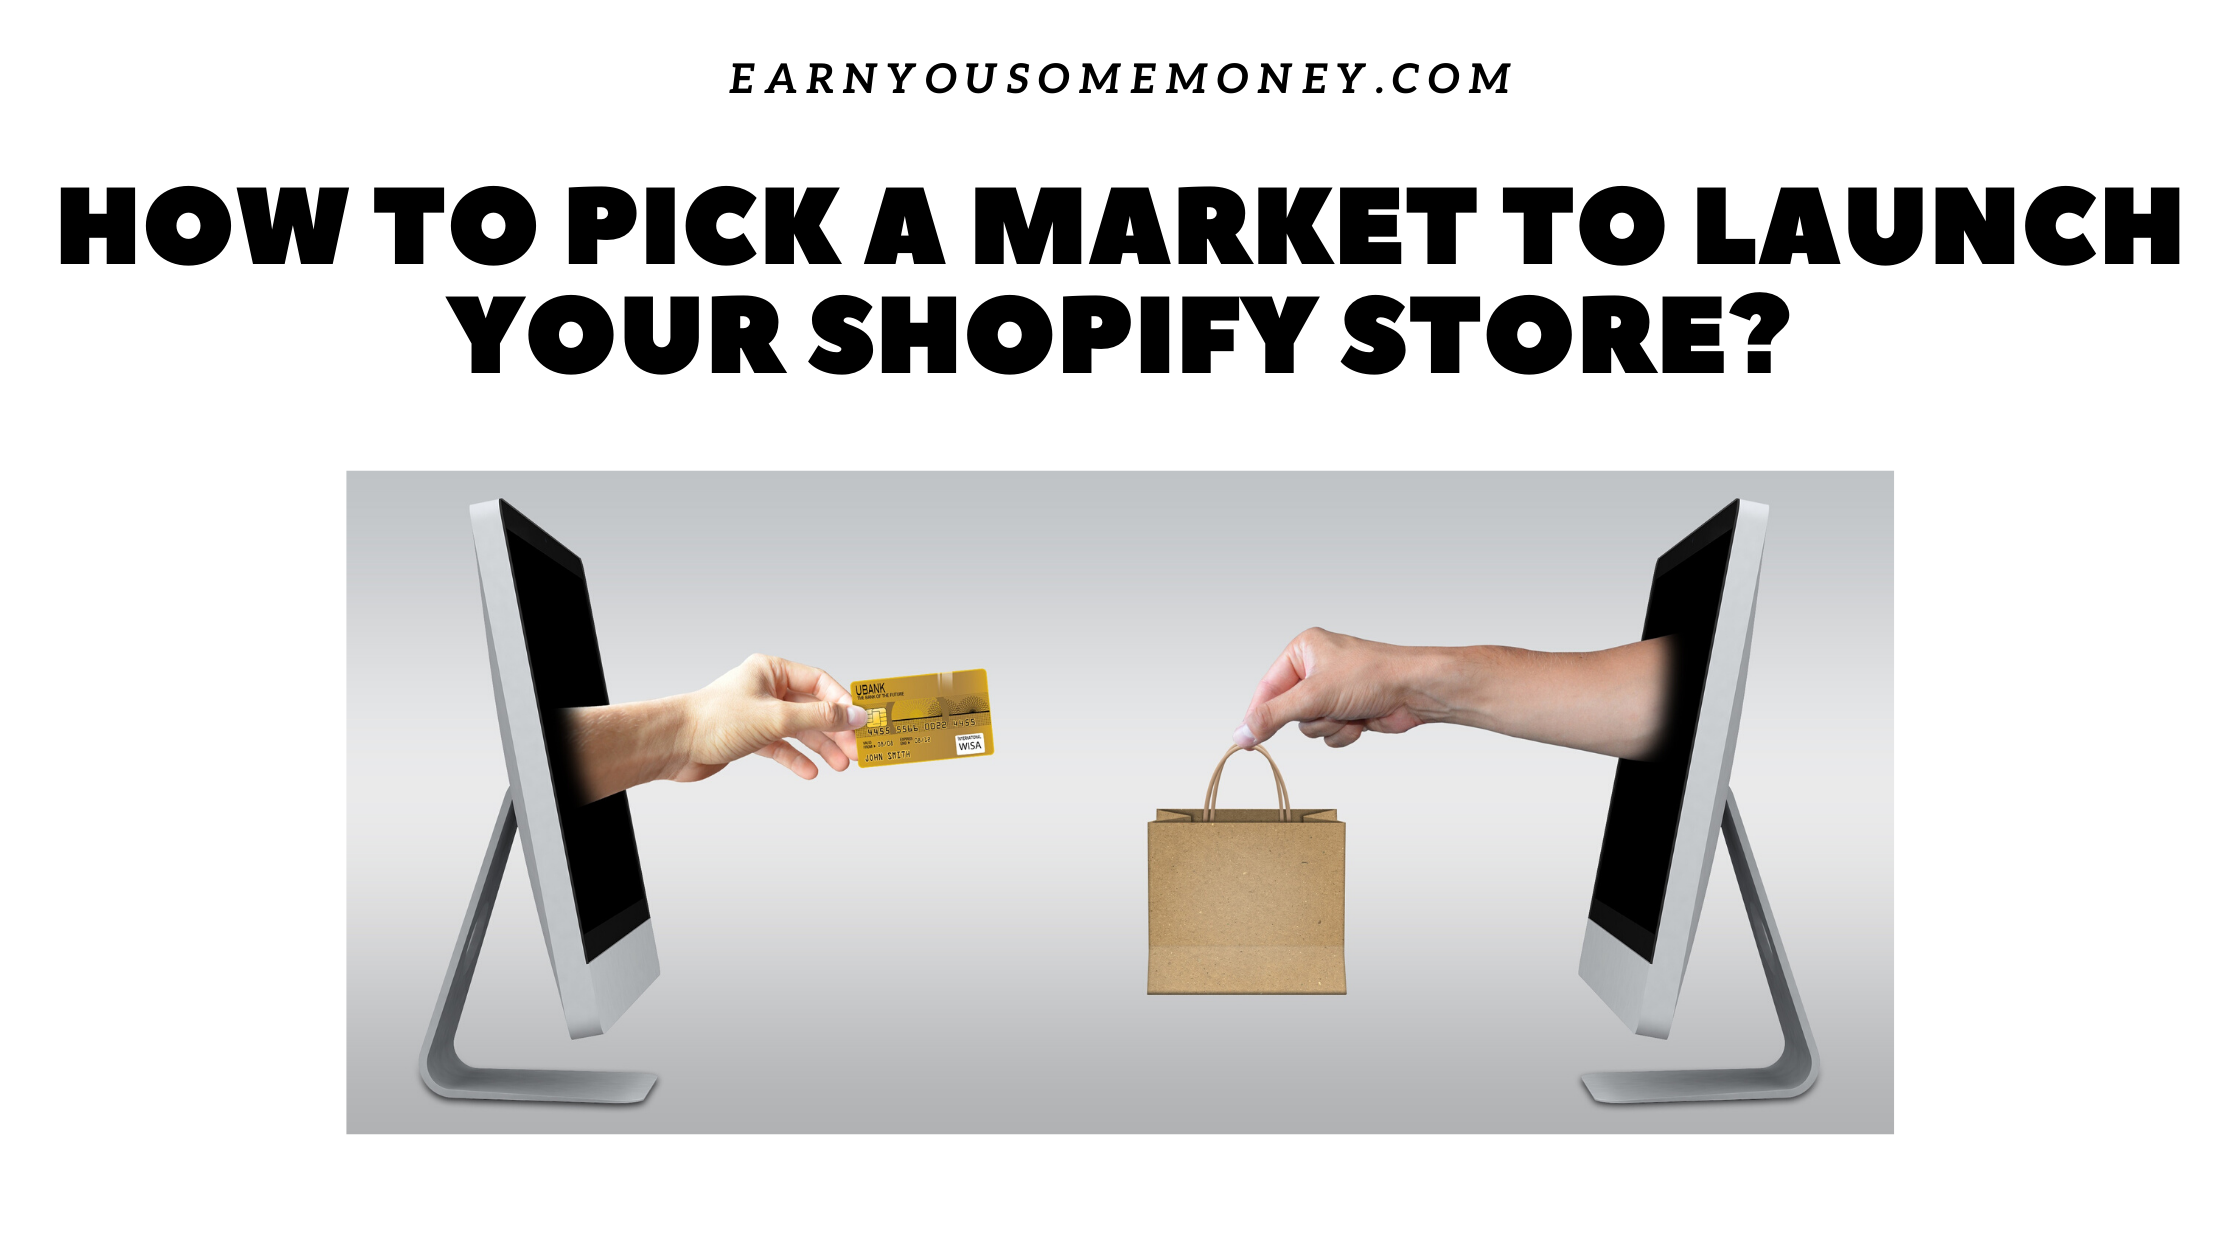 How To Pick A Market To Launch Your Shopify Store